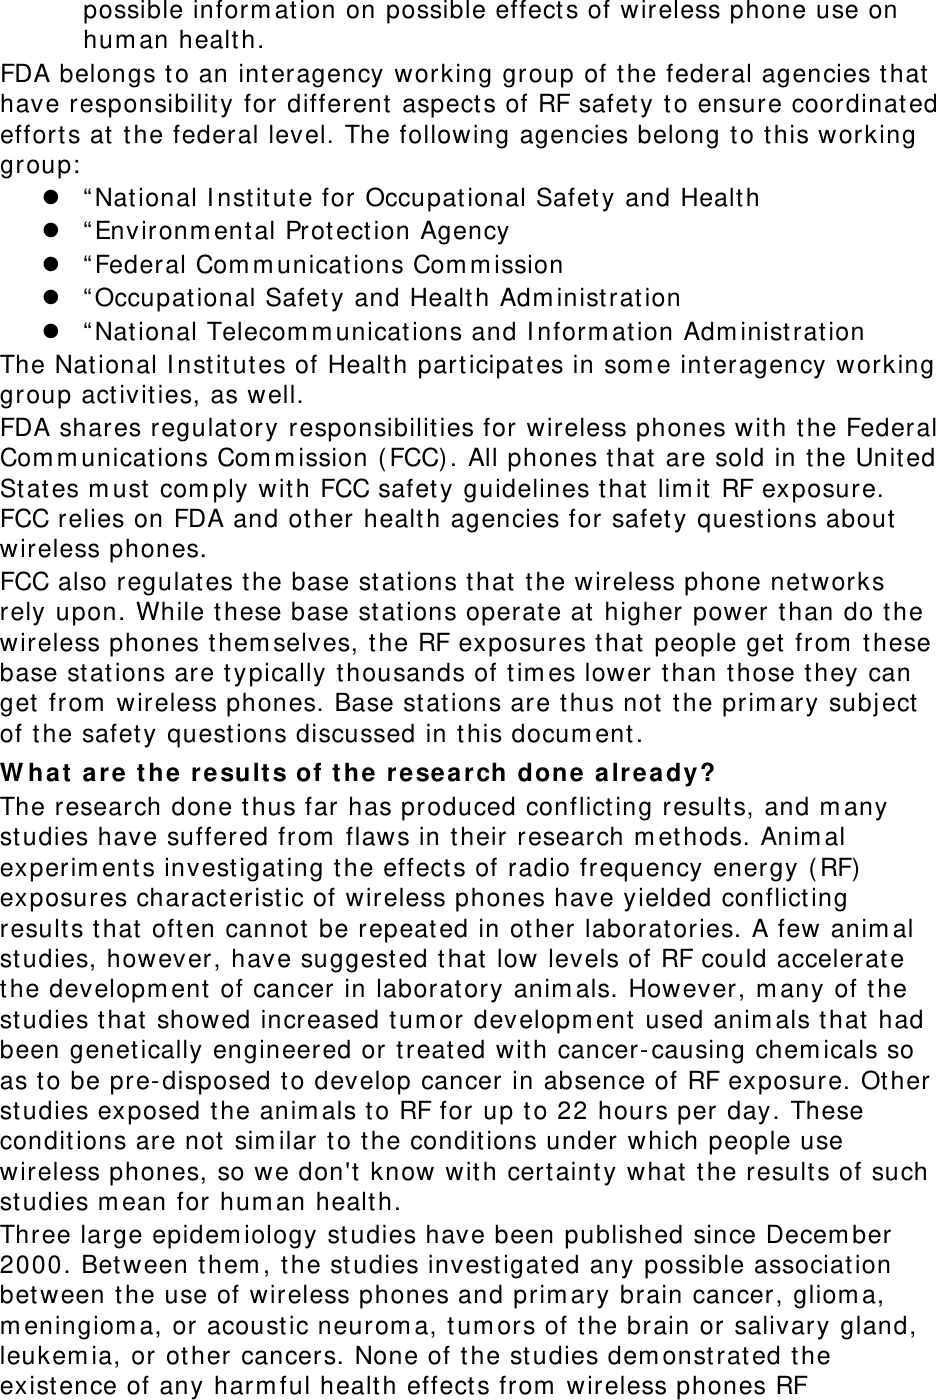 possible inform ation on possible effect s of wireless phone use on hum an healt h. FDA belongs t o an int eragency working group of t he federal agencies that  have responsibilit y for different  aspect s of RF safety to ensure coordinat ed effort s at the federal level. The following agencies belong t o t his working group:   “ Nat ional I nstit ut e for Occupational Safety and Health  “ Environm ent al Protect ion Agency  “ Federal Com m unicat ions Com m ission  “ Occupat ional Safety and Health Adm inistrat ion  “ Nat ional Telecom m unications and I nform ation Adm inist ration The Nat ional I nstit utes of Health participates in som e int eragency working group activit ies, as well. FDA shares regulatory responsibilit ies for wireless phones wit h the Federal Com m unicat ions Com m ission (FCC) . All phones that are sold in the United St ates m ust com ply with FCC safety guidelines that lim it RF exposure. FCC relies on FDA and ot her health agencies for safety quest ions about wireless phones. FCC also regulates t he base stat ions t hat  t he wireless phone net works rely upon. While these base st at ions operate at higher power t han do t he wireless phones them selves, the RF exposures that people get  from  these base st at ions are t ypically thousands of tim es lower than those t hey can get from  wireless phones. Base stat ions are t hus not the prim ary subject of t he safety quest ions discussed in t his docum ent . W ha t  are the r esult s of t he research done alre ady? The research done thus far has produced conflict ing results, and m any studies have suffered from  flaws in t heir research m et hods. Anim al experim ent s invest igating the effect s of radio frequency energy ( RF)  exposures charact erist ic of wireless phones have yielded conflict ing results that oft en cannot be repeated in other laborat ories. A few anim al studies, however, have suggest ed t hat low levels of RF could accelerate the developm ent  of cancer in laborat ory anim als. However, m any of t he studies that showed increased t um or developm ent  used anim als that  had been genetically engineered or treat ed wit h cancer-causing chem icals so as to be pre-disposed t o develop cancer in absence of RF exposure. Ot her studies exposed t he anim als to RF for up t o 22 hours per day. These condit ions are not  sim ilar to the condit ions under which people use wireless phones, so we don&apos;t  know with certaint y what  t he result s of such studies m ean for hum an health. Three large epidem iology st udies have been published since Decem ber 2000. Between them , t he st udies invest igated any possible association between t he use of wireless phones and prim ary brain cancer, gliom a, m eningiom a, or acoust ic neurom a, t um ors of t he brain or salivary gland, leukem ia, or other cancers. None of t he studies dem onst rated the exist ence of any harm ful healt h effect s from  wireless phones RF 